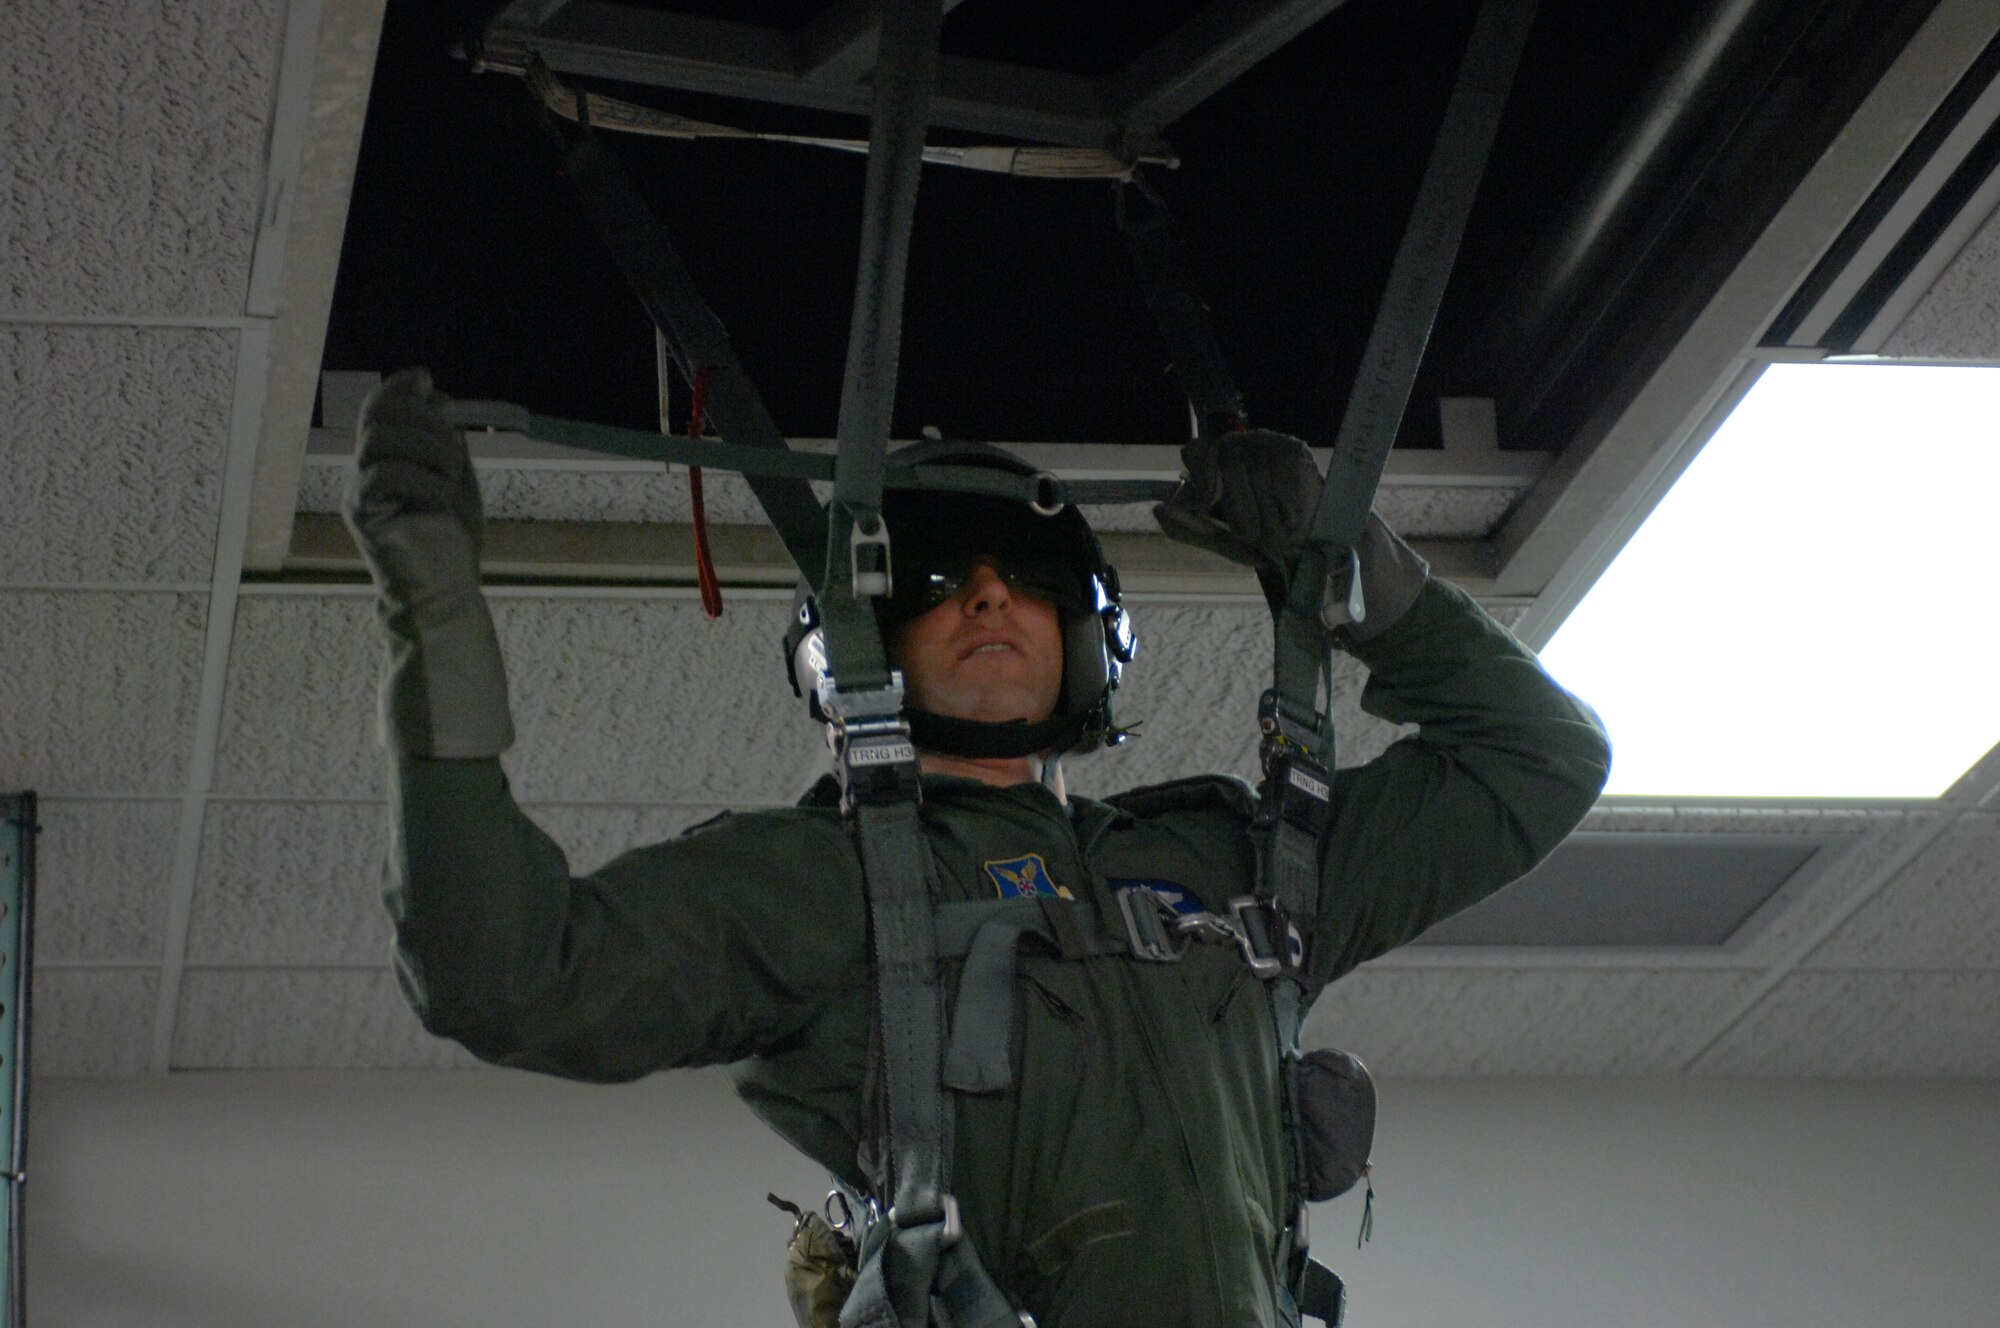 WHITEMAN AIR FORCE BASE, Mo. – Capt. Brian Palmer, 393rd Bomb Squadron, attempting to connect his personnel lowering device to his parachute risers.  The PLD is used to safely lower suspended aircrew from dangerous elevations. If used improperly, the aircrew could suffer a fatal fall.  (U.S. Air Force photo by Airman 1st Class Montserrat Ramirez) (Released)